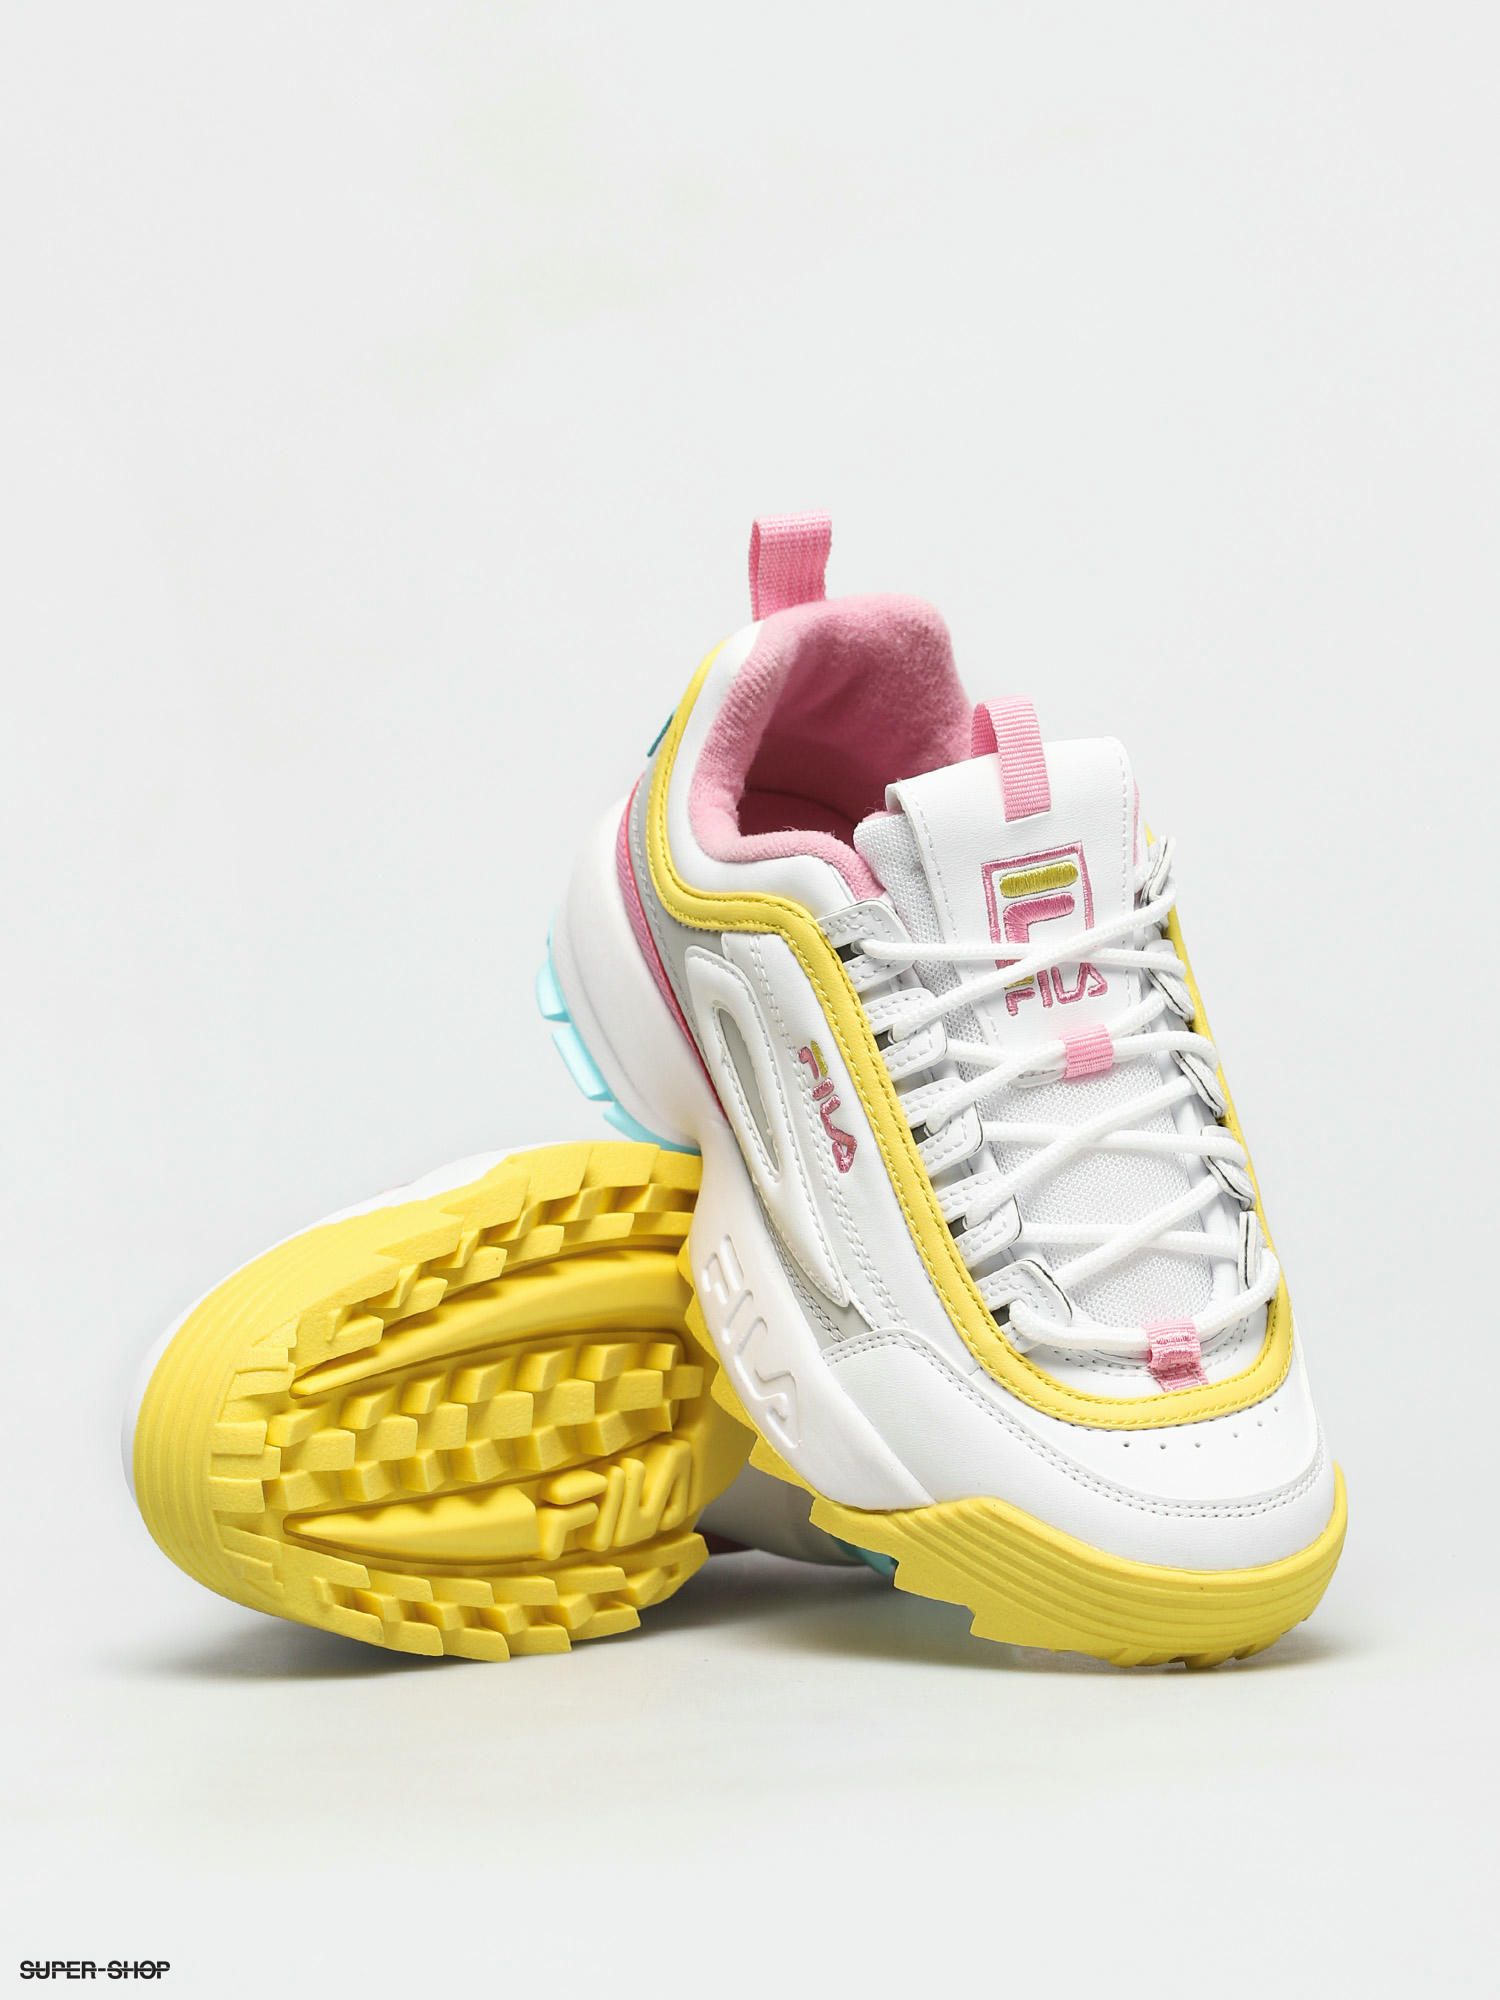 Fila Disruptor Cb Low Shoes Wmn (white/limelight)